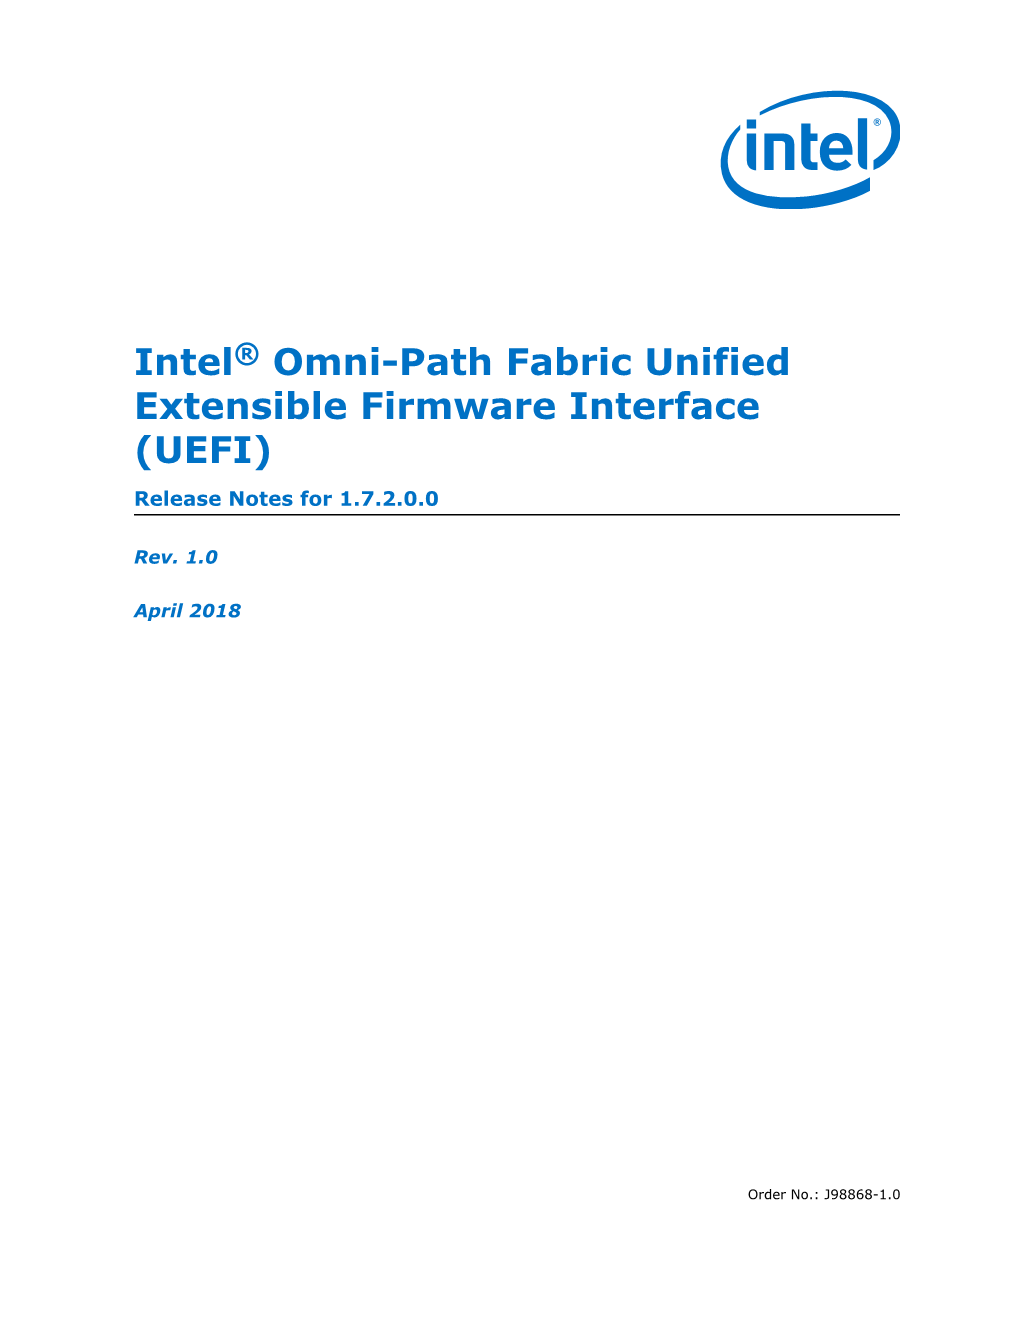 Intel® Omni-Path Fabric Unified Extensible Firmware Interface (UEFI) Release Notes for 1.7.2.0.0